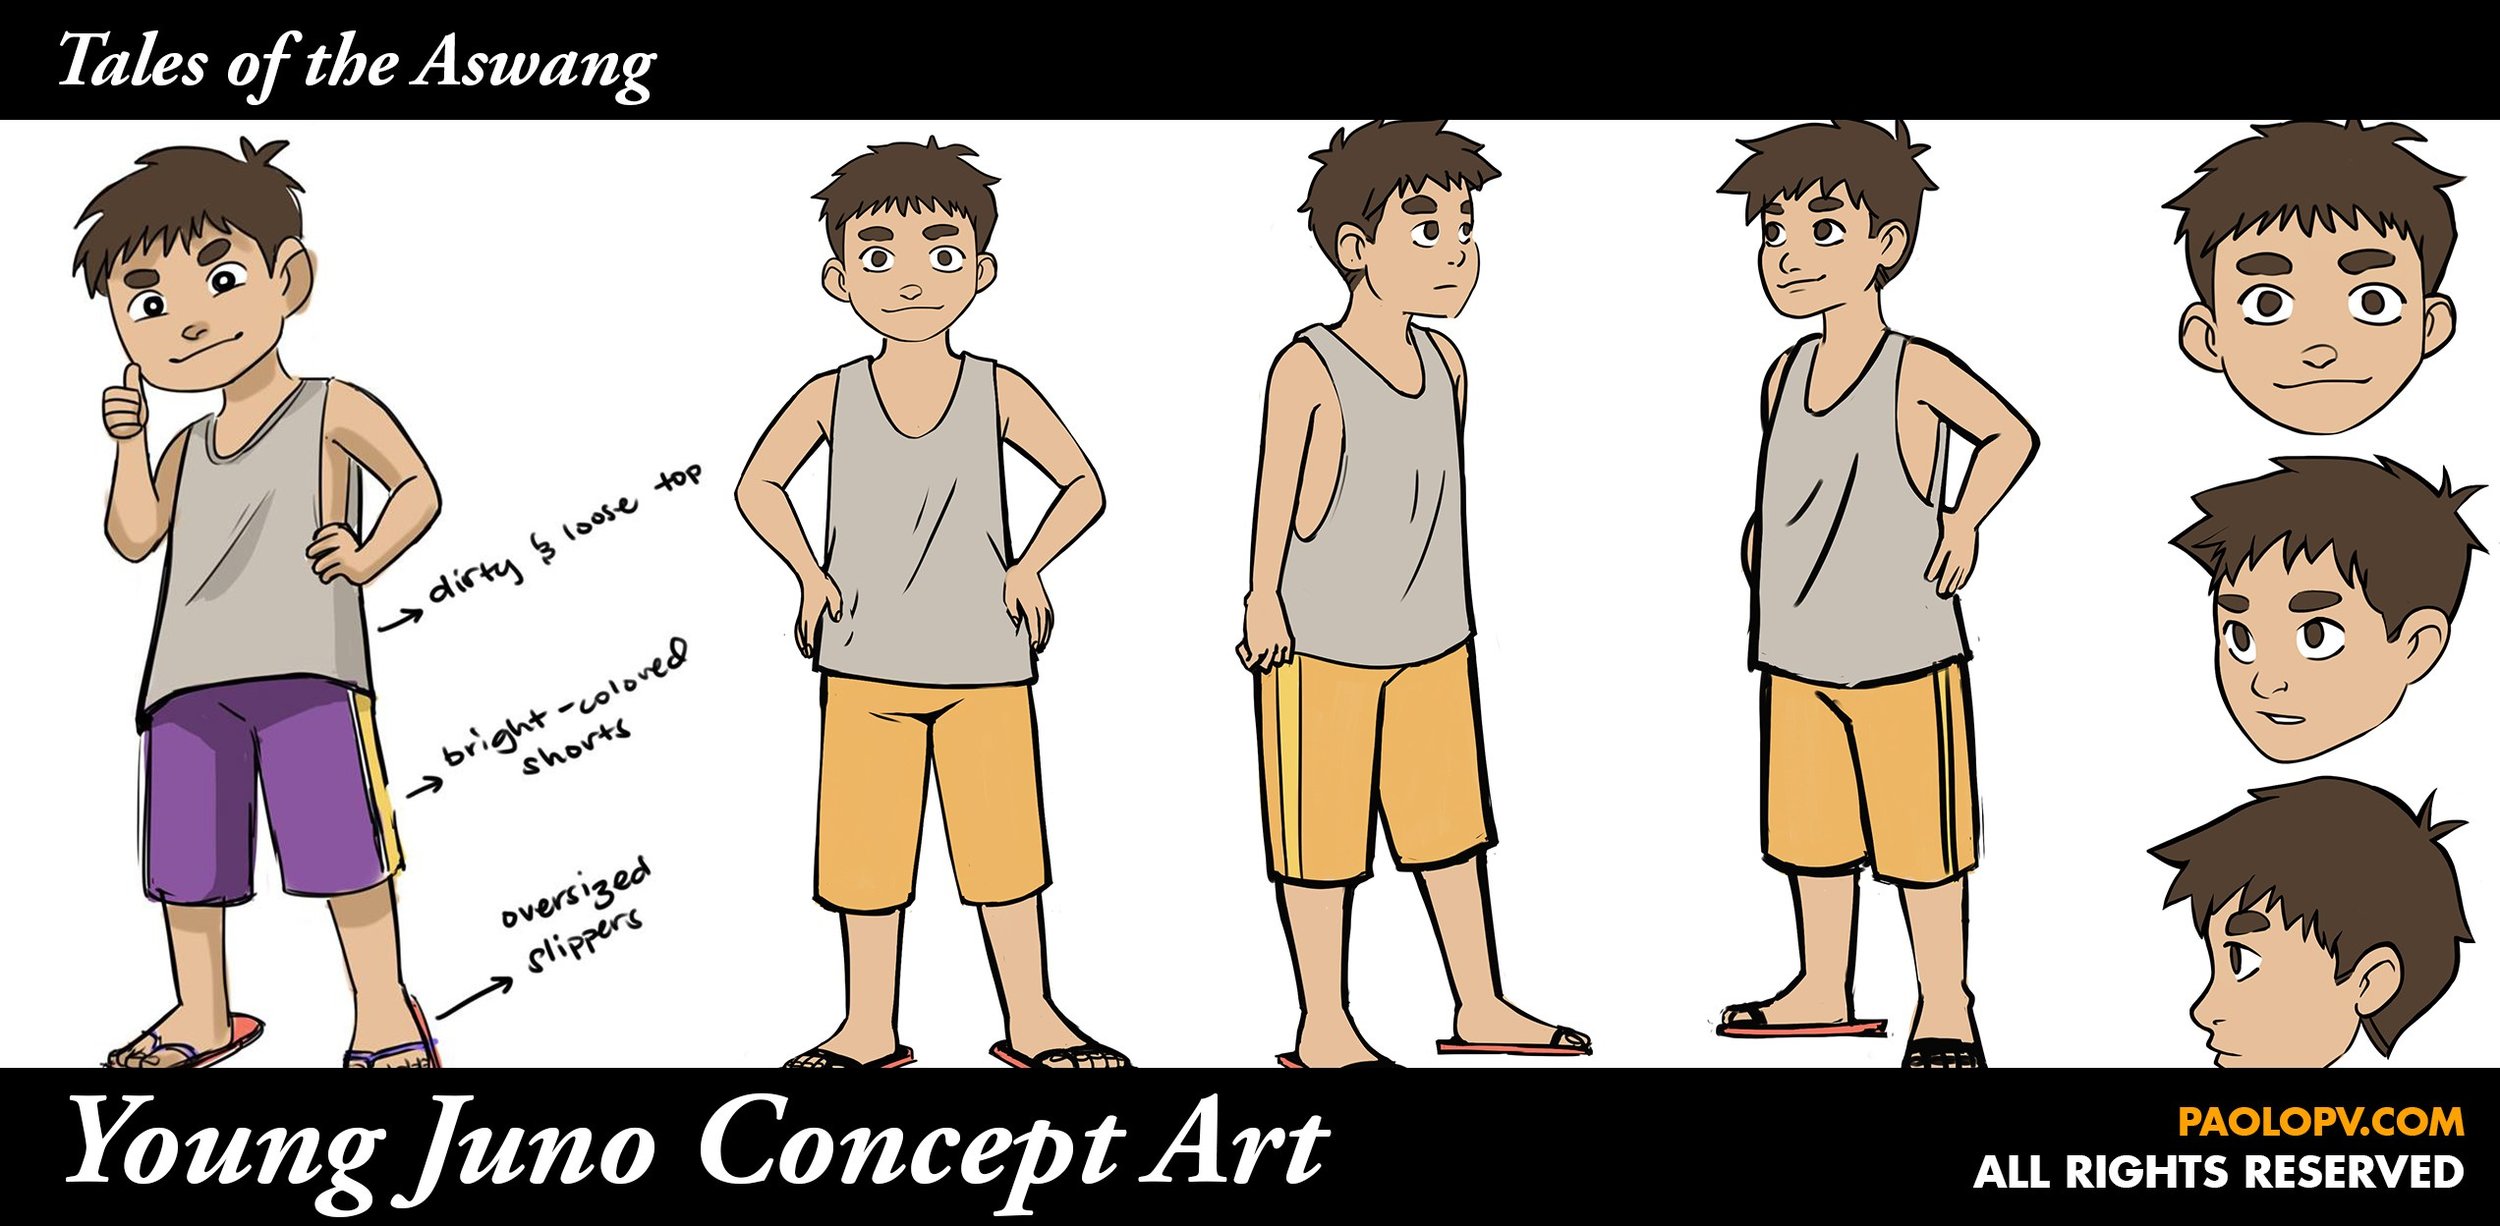 Tales-of-the-Aswang-Concept-Art-Young-Juno.jpg